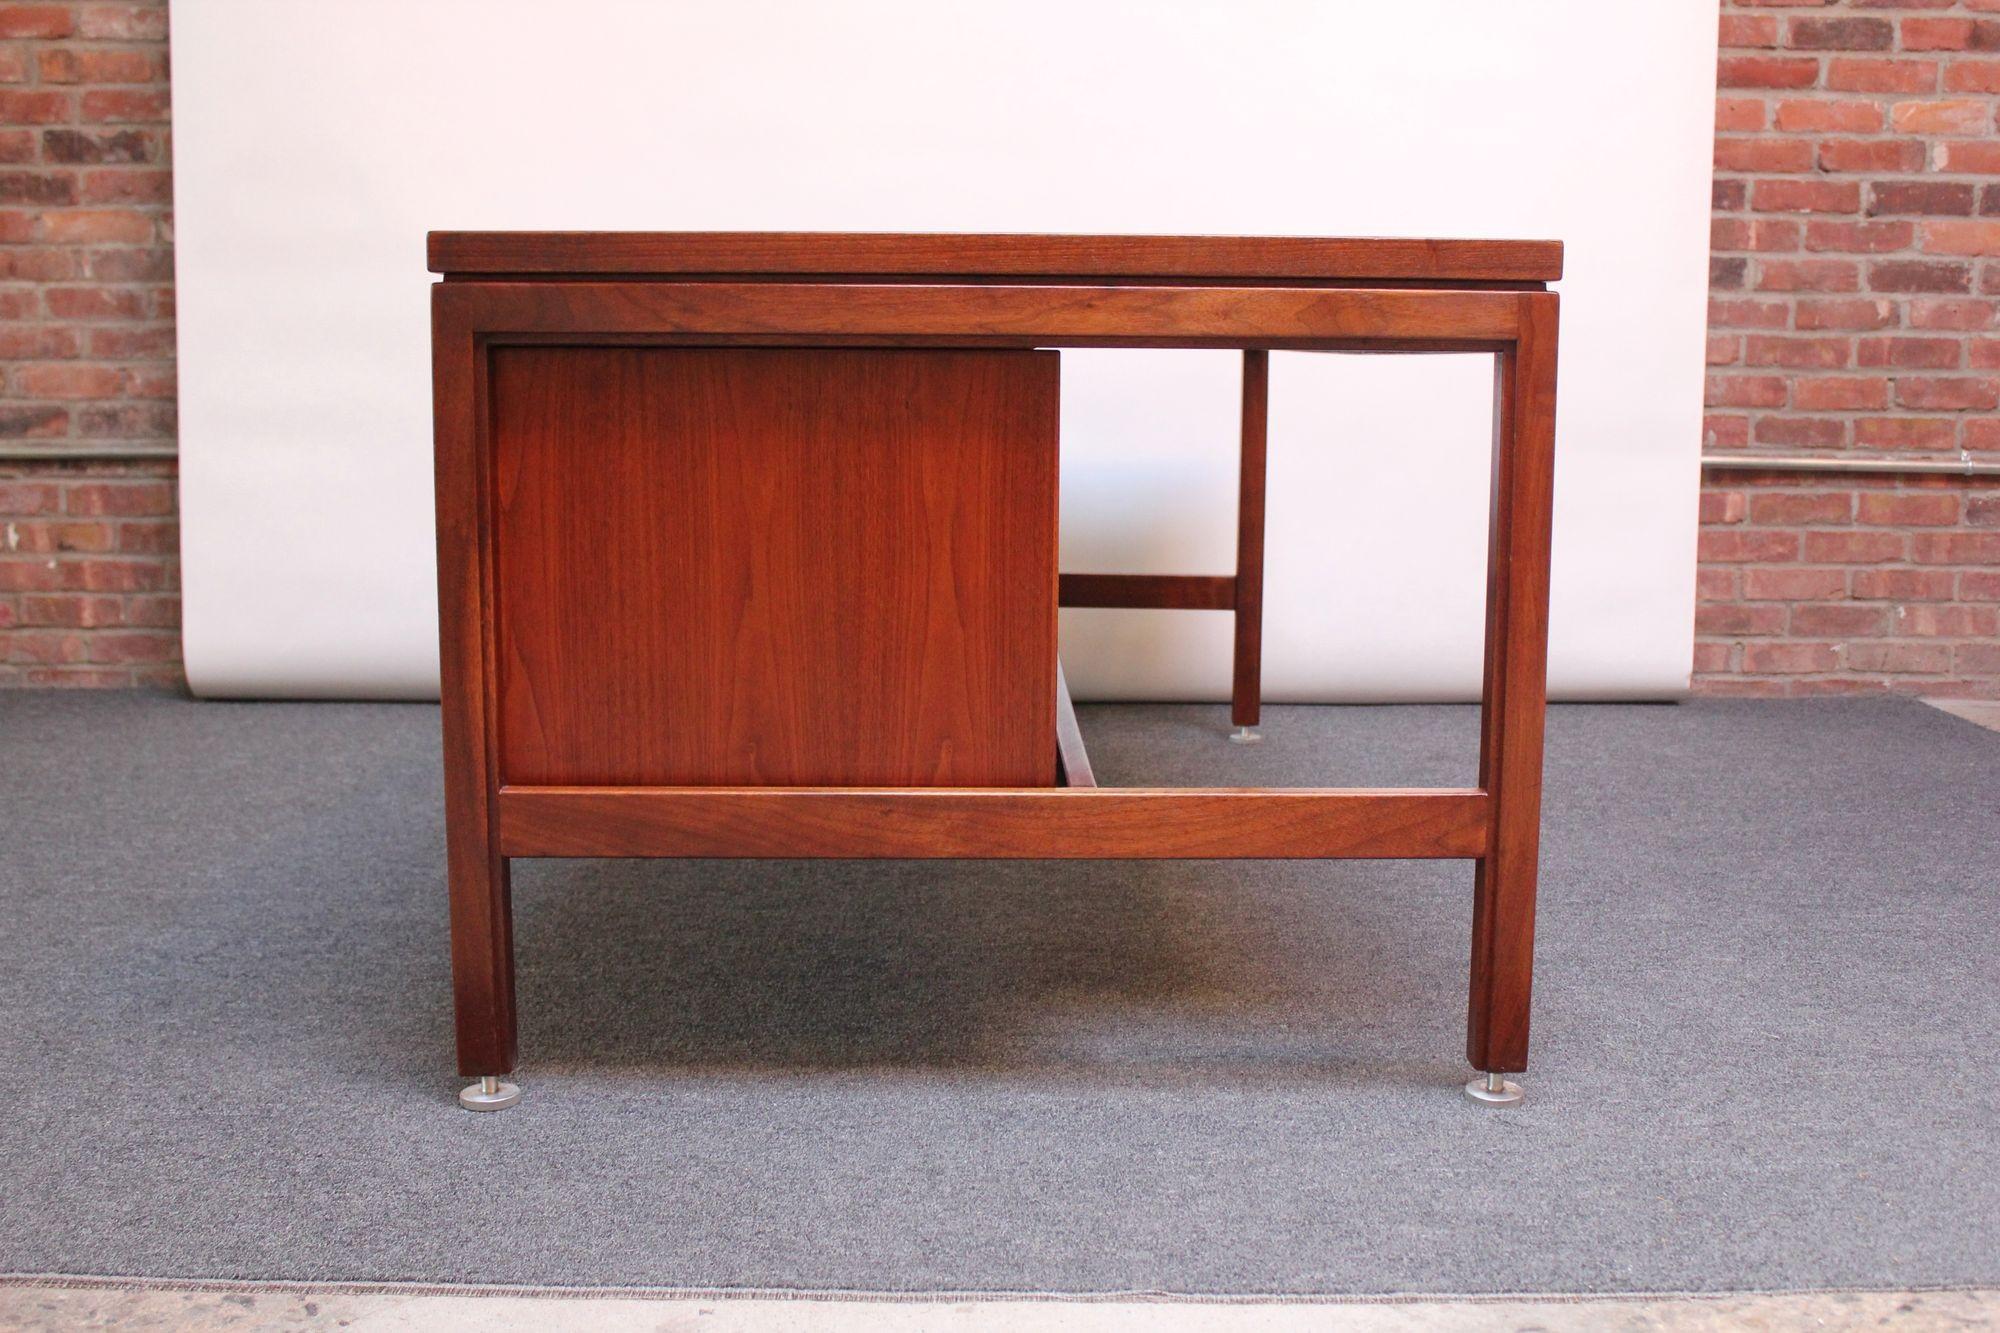 Aluminum Mid-Century Modern Walnut Executive Desk with File Cabinet Drawer by Jens Risom